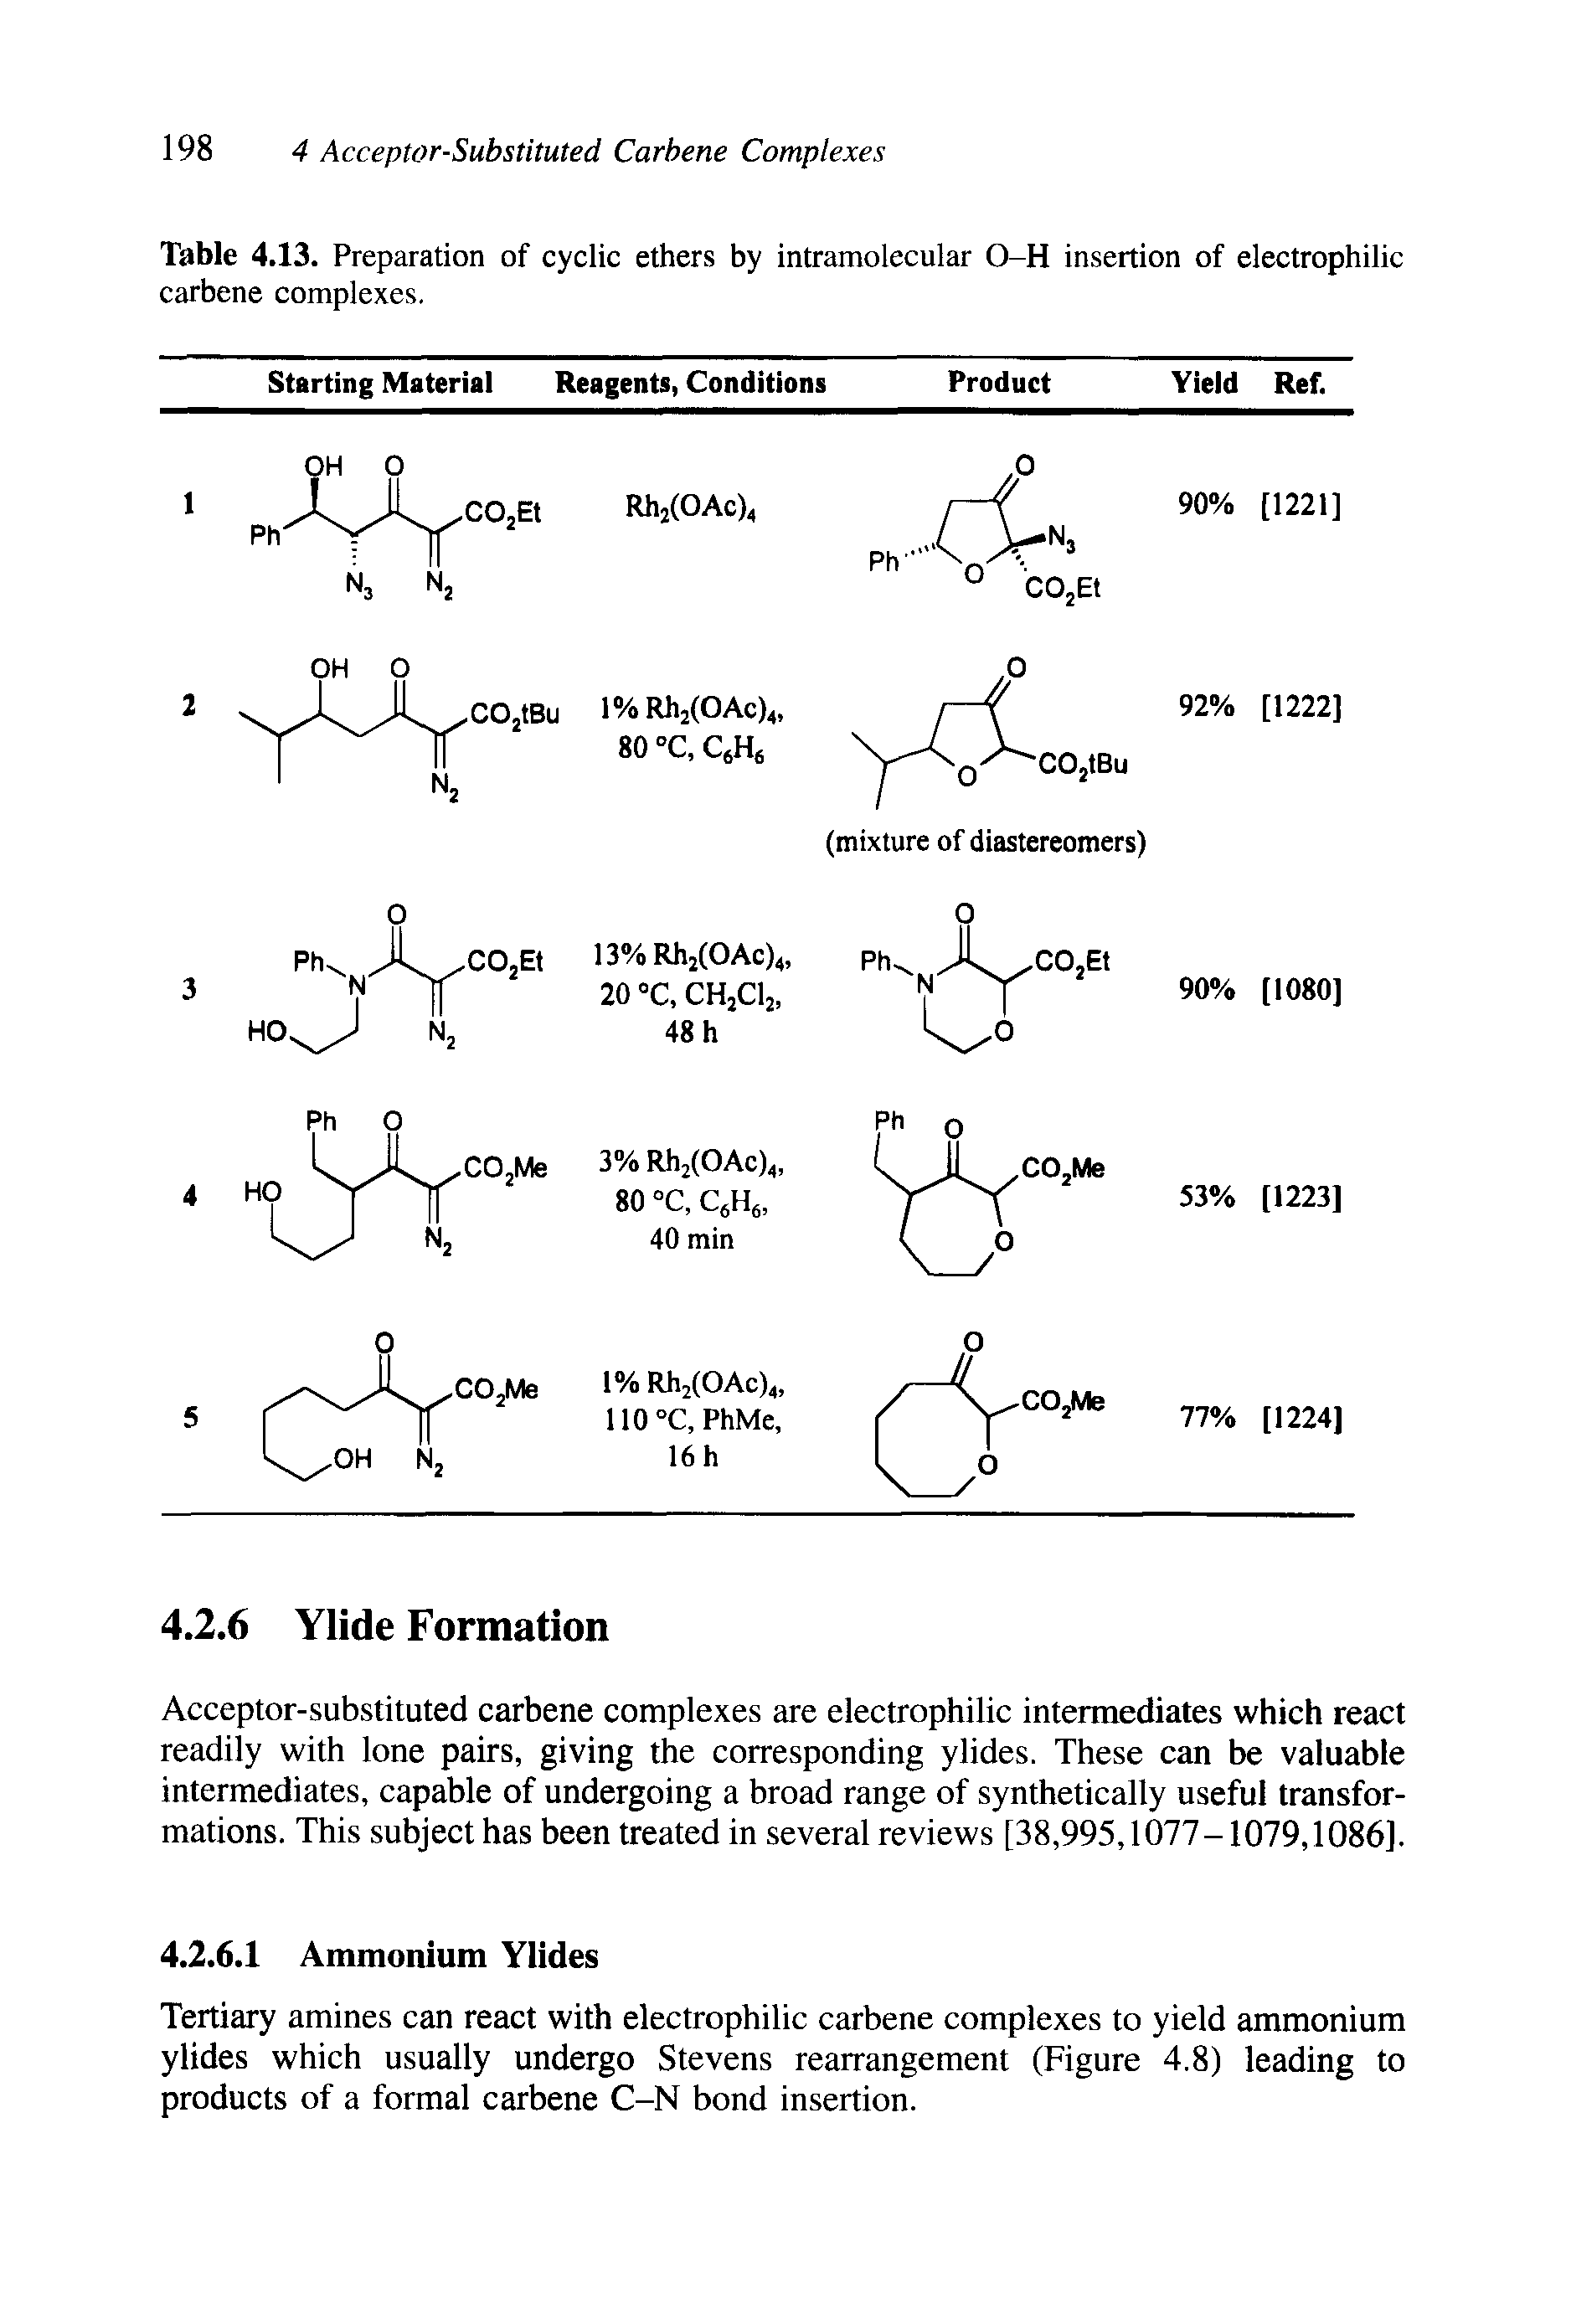 Table 4.13. Preparation of cyclic ethers by intramolecular 0-H insertion of electrophilic carbene complexes.